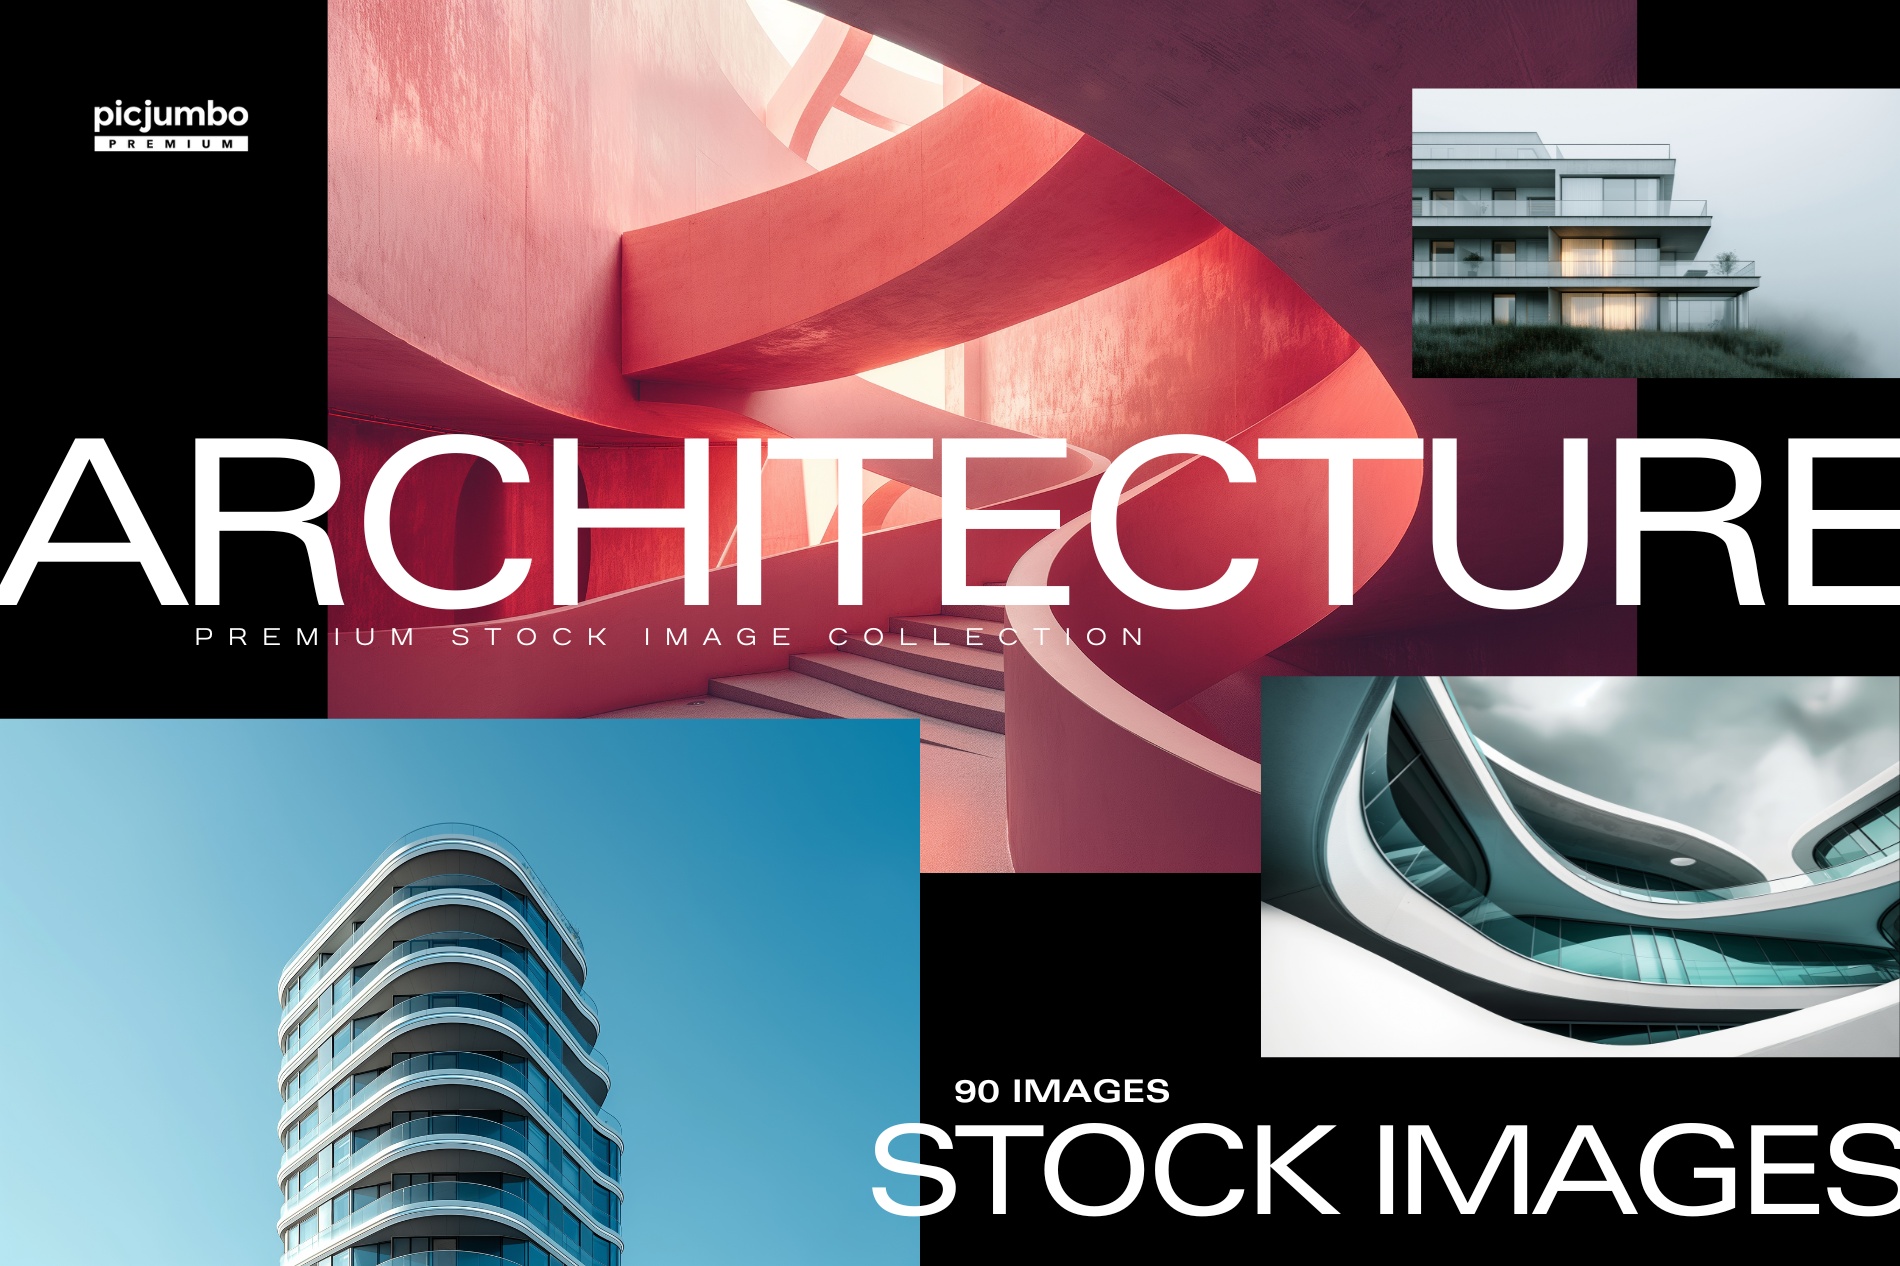 Download hi-res stock photos from our Architecture PREMIUM Collection!